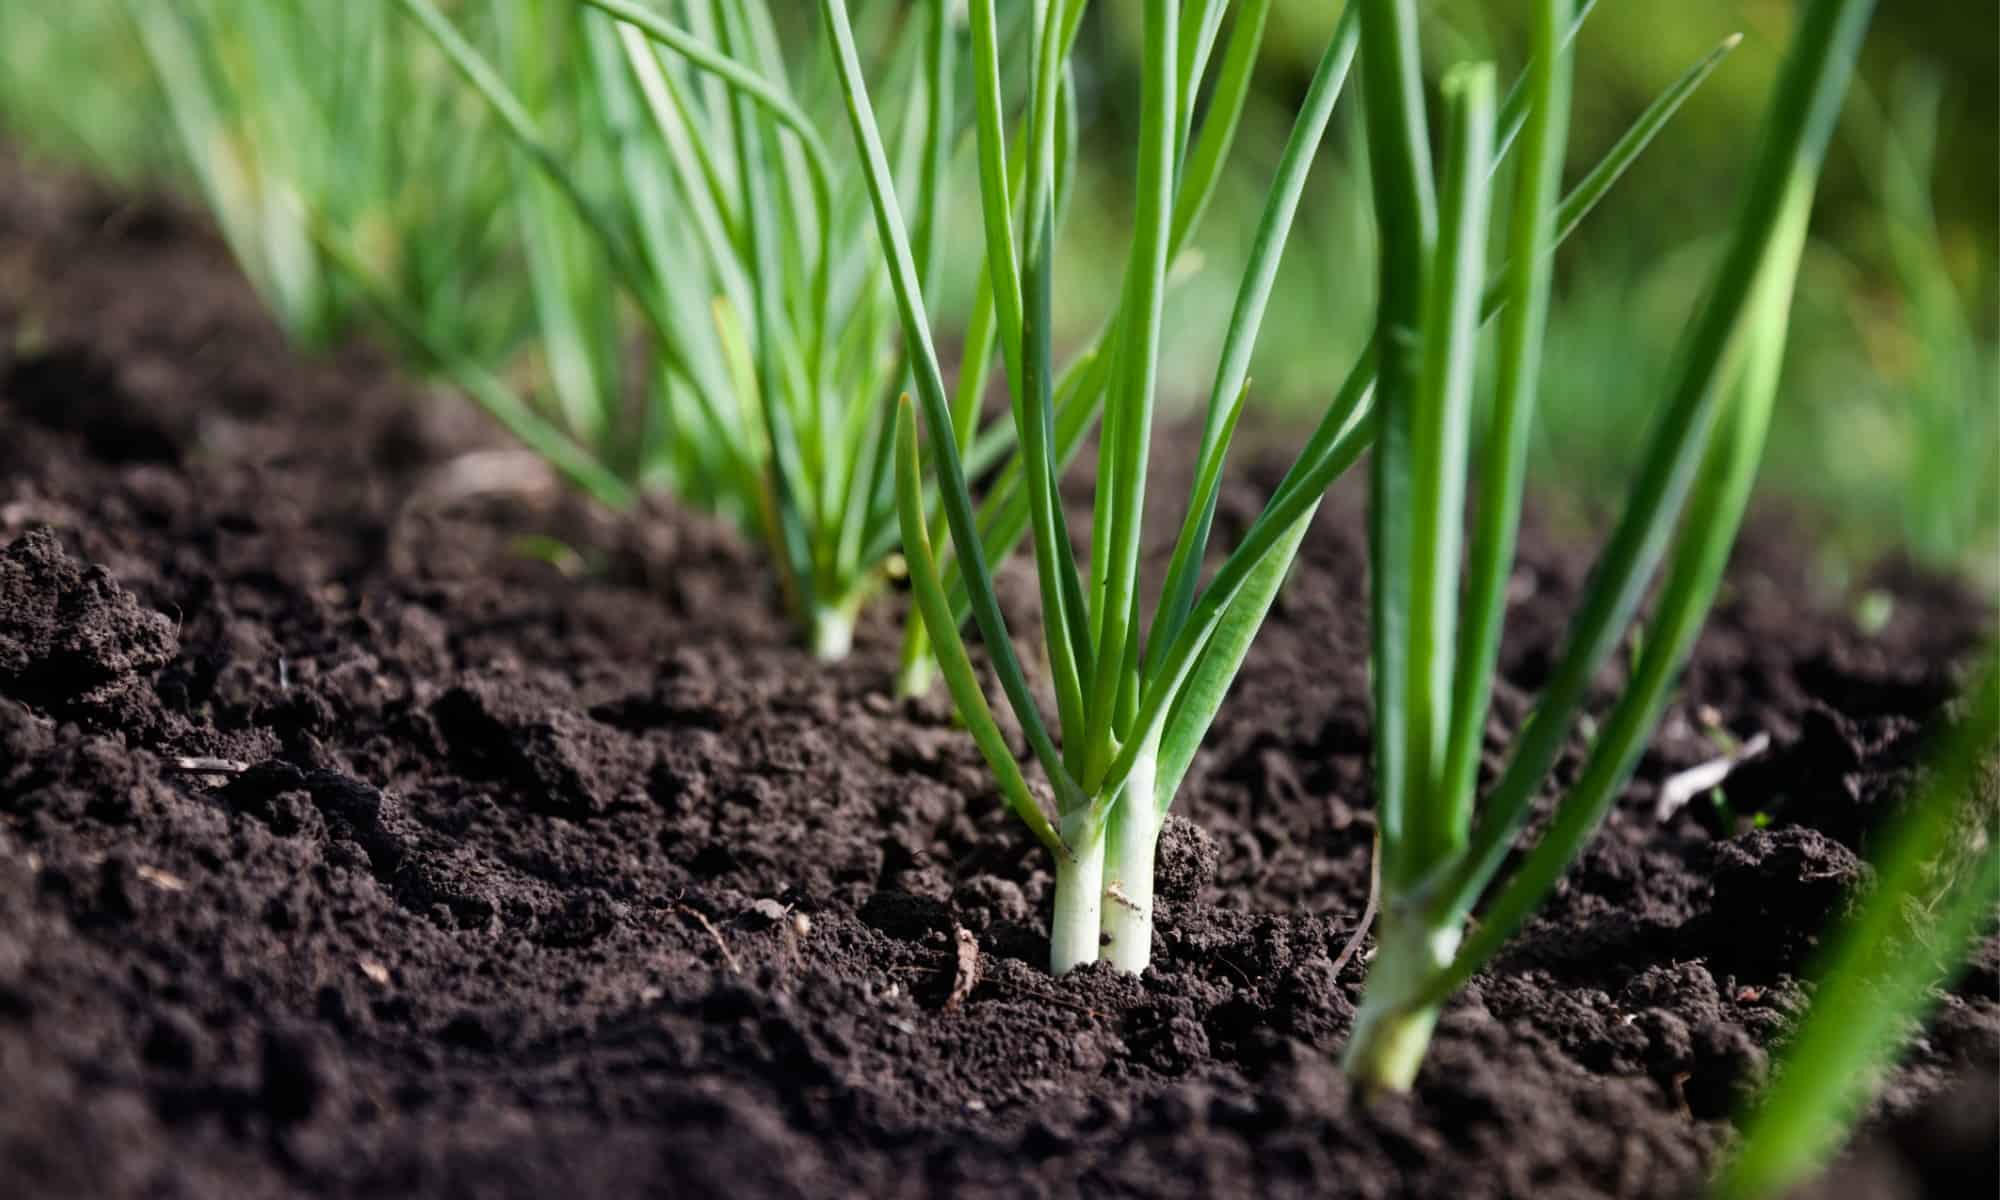 Watering and Fertilizing: Discover the proper watering and fertilizing techniques to ensure optimal growth and flavor in your green onions.